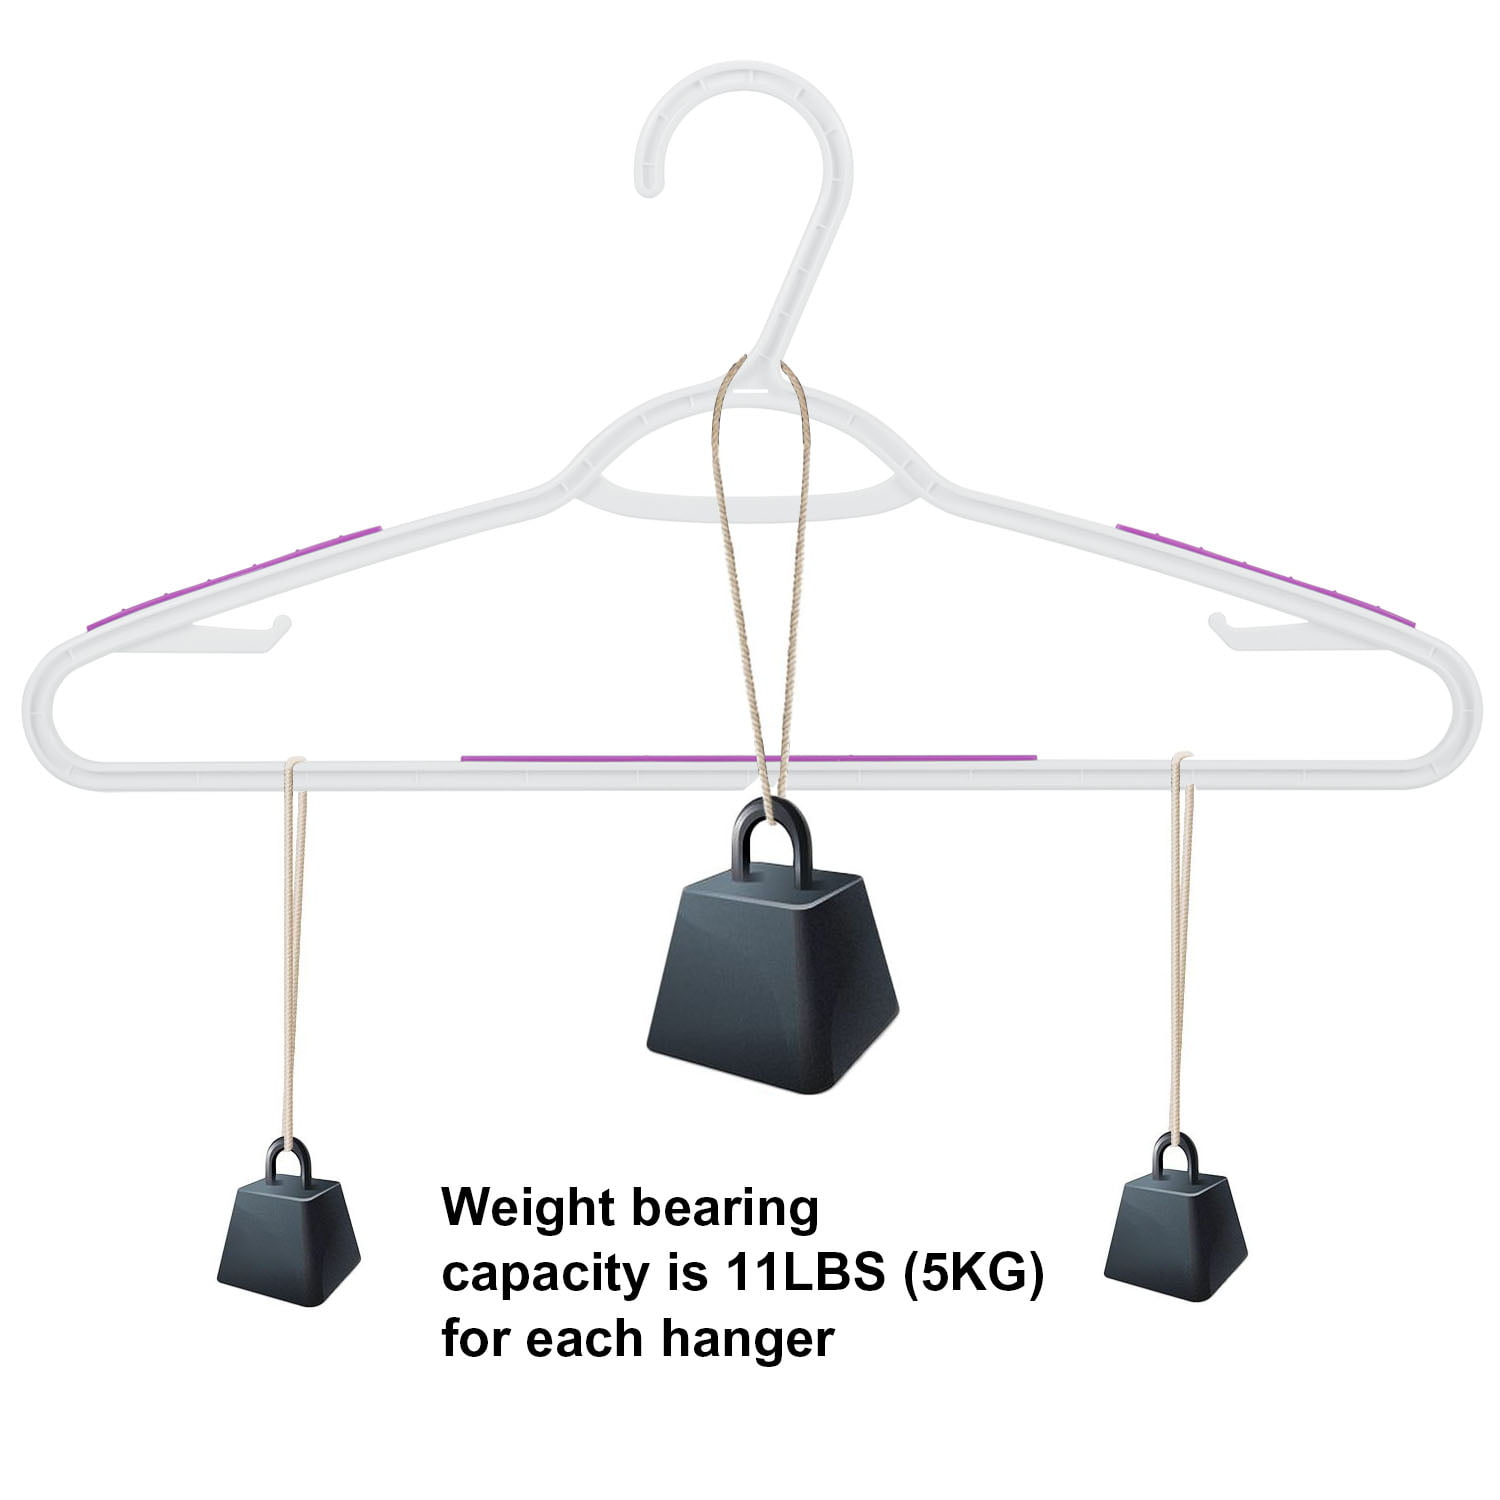 Dropship 10 Pack Clothes Hangers Non-Slip Notched Space-Saving Plastic  Clothing Hangers to Sell Online at a Lower Price